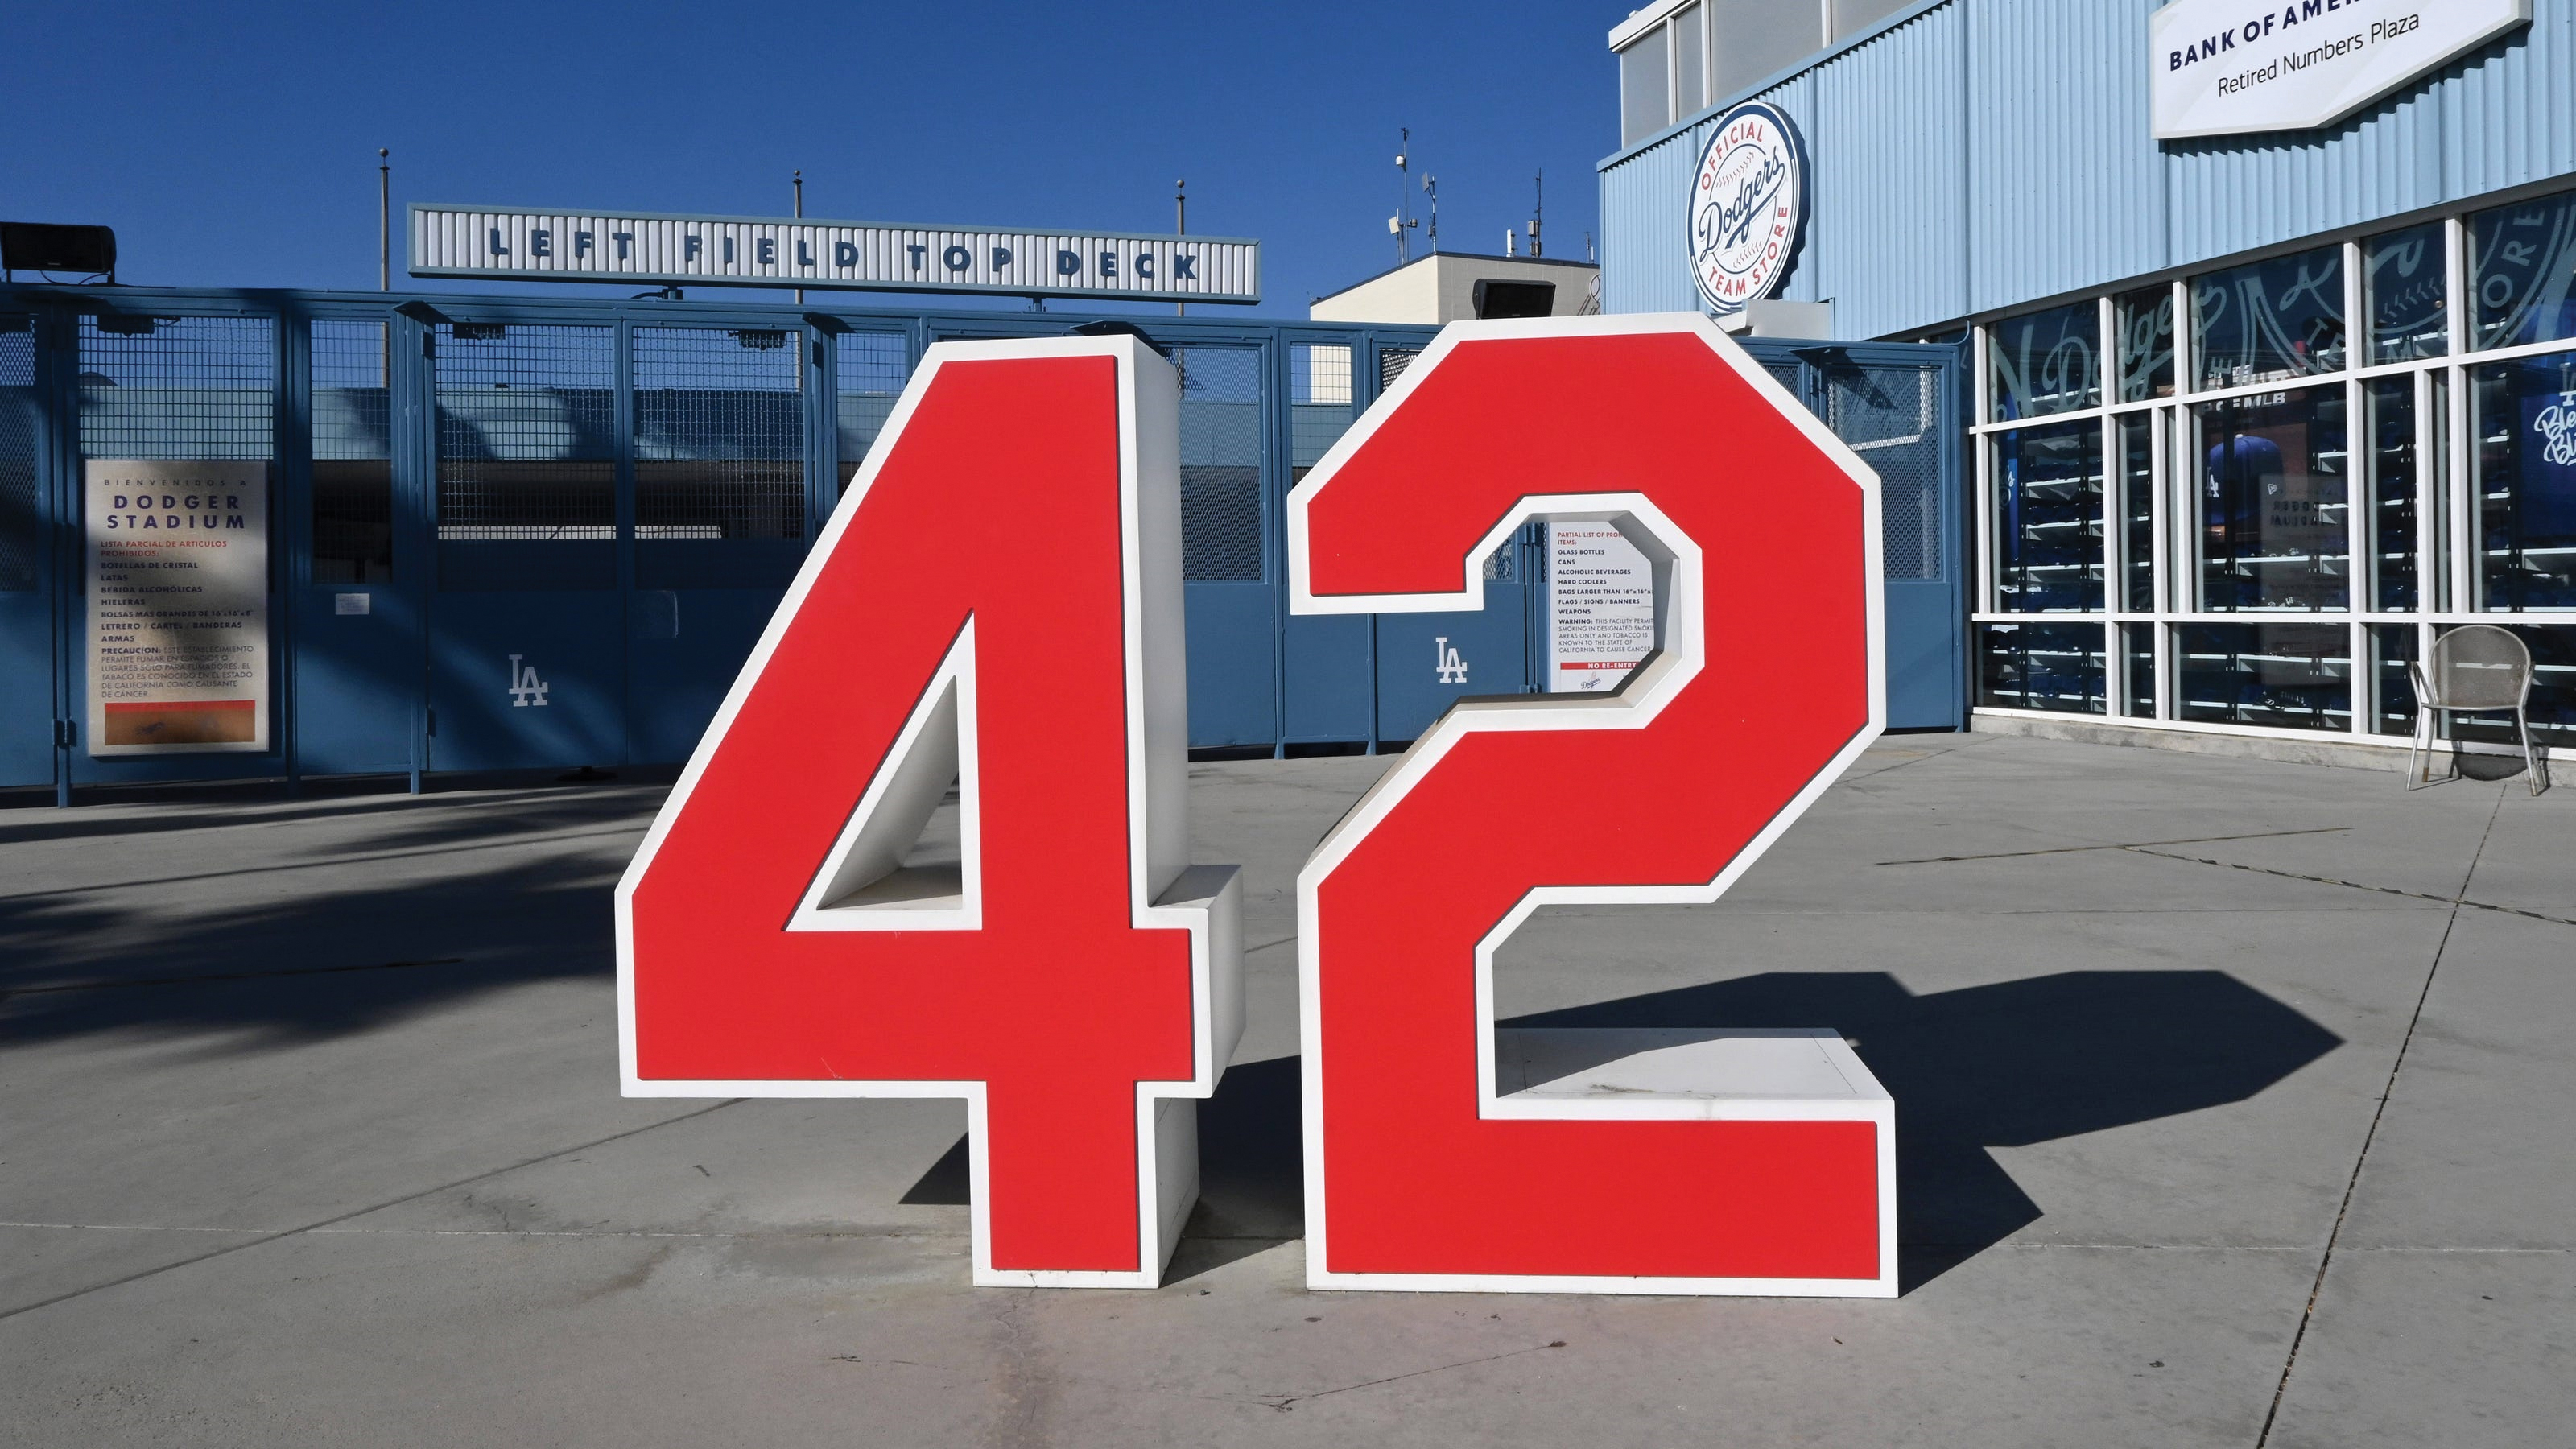 Jackie Robinson Day commemorated by MLB on Aug. 28